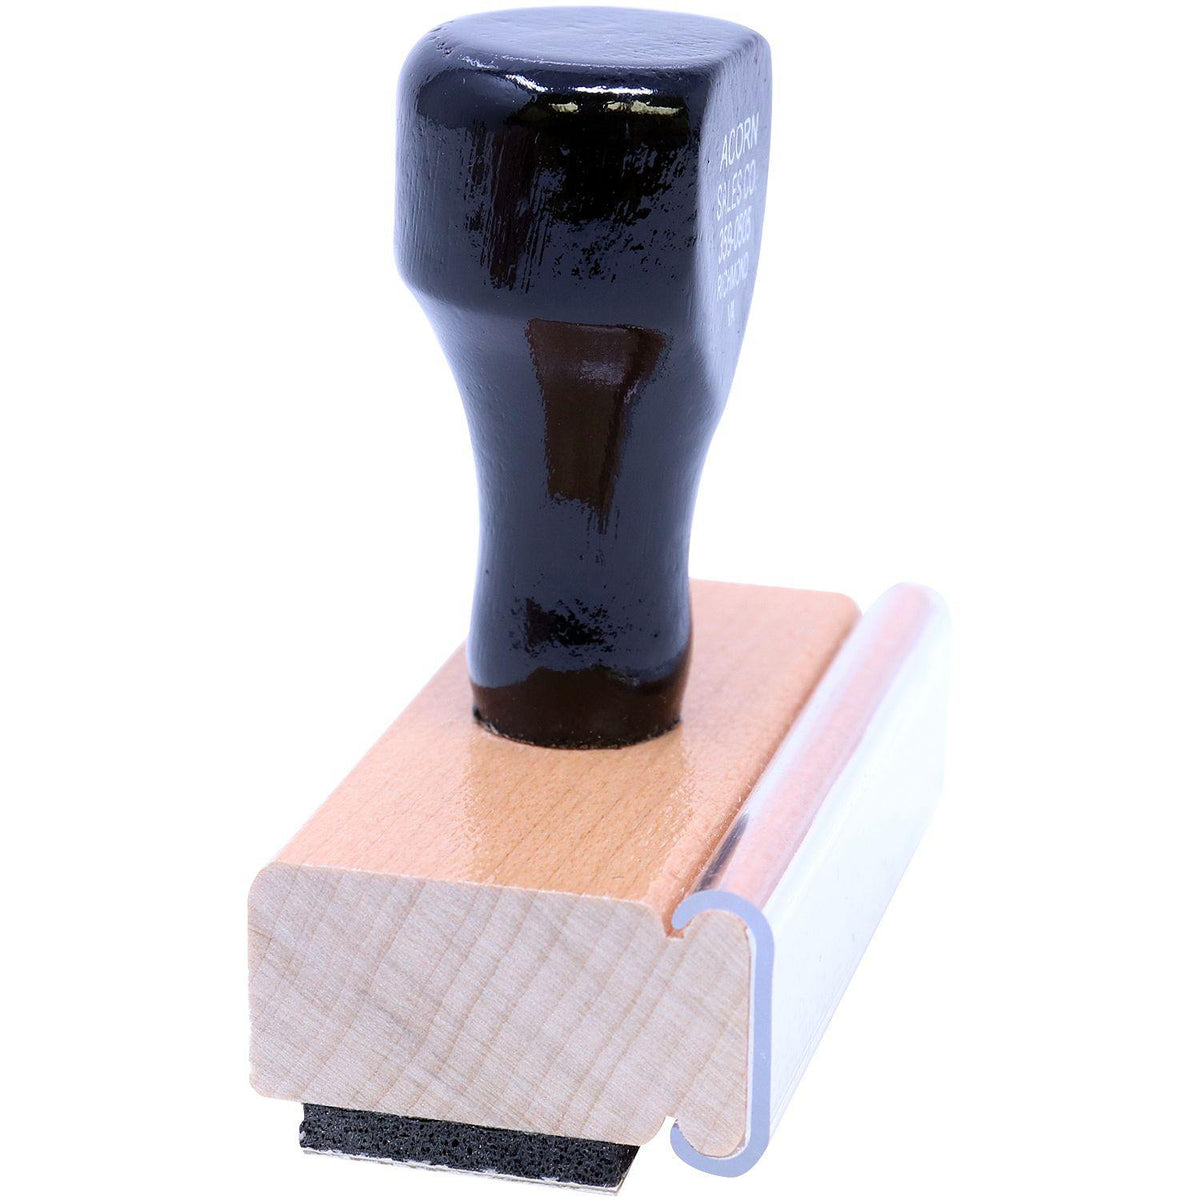 Side View of Telehealth Rubber Stamp at an Angle